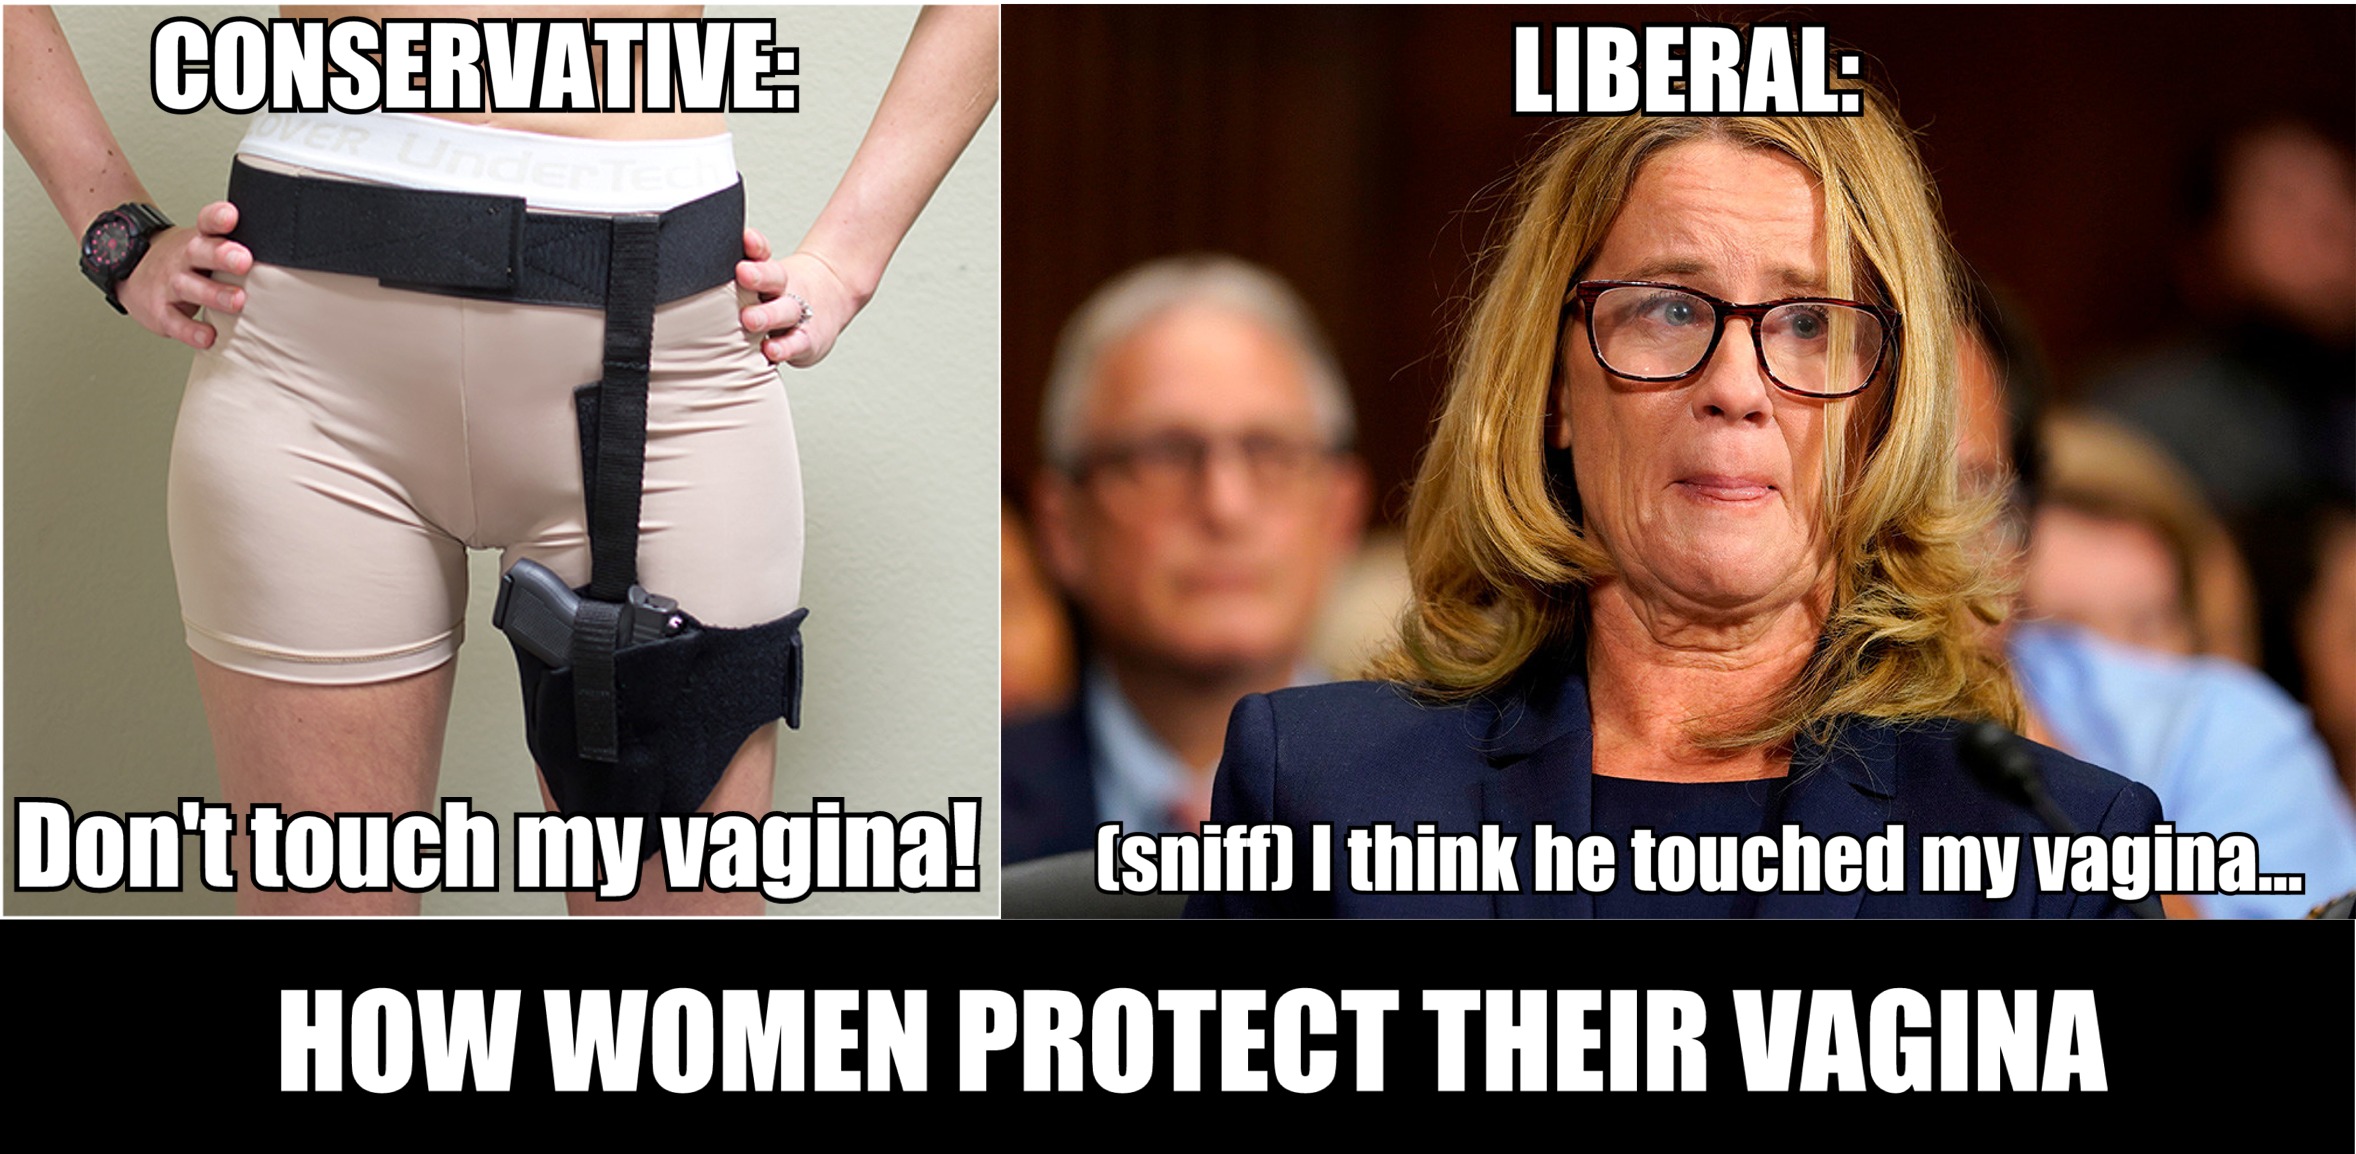 christine blasey ford - Conservative Liberal Don't touch my vagina! sniff I think he touched my vagina. How Women Protect Their Vagina